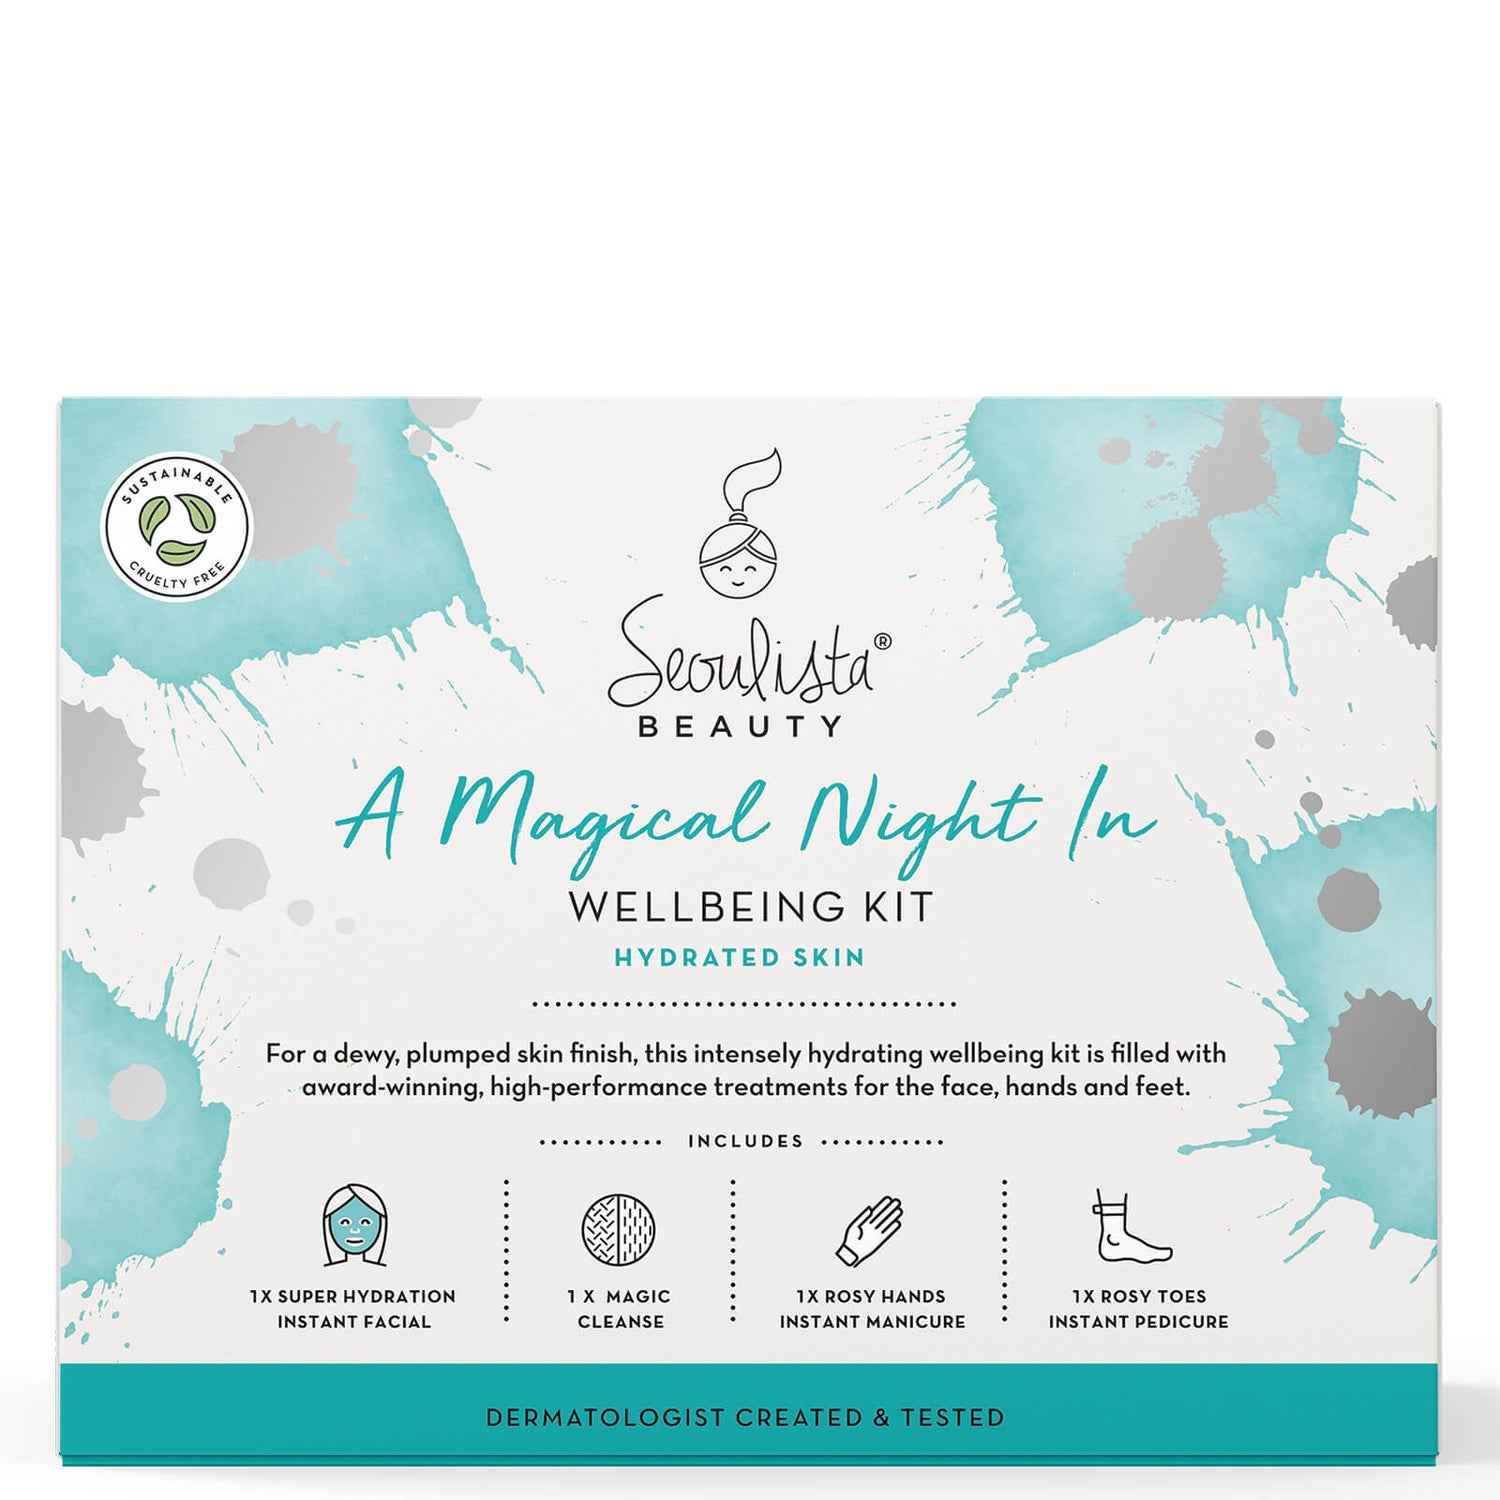 Seoulista Beauty A Magical Night In Wellbeing Kit - Hydrerad hud